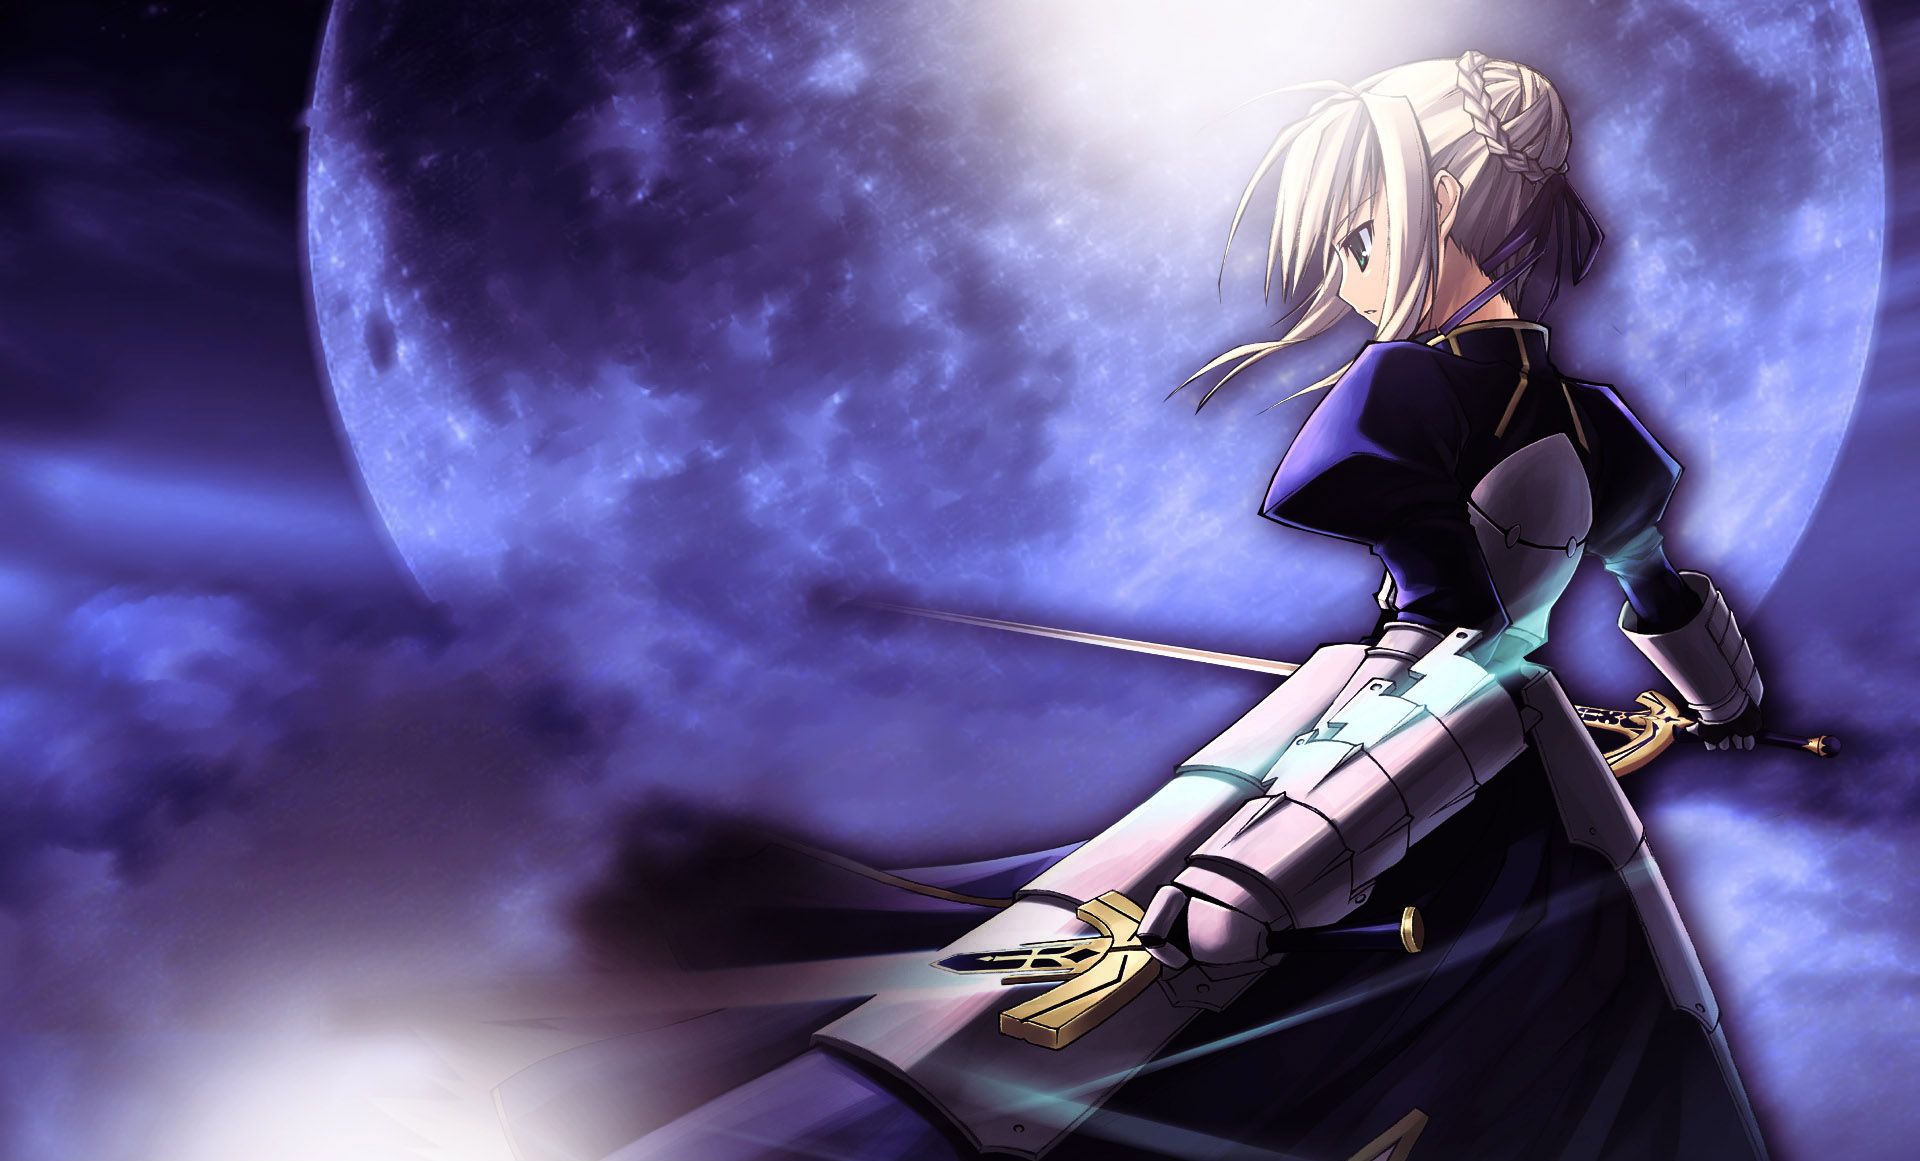 1920x1161 Free HD Photo Saber Fate Stay Night - Fate Stay Night Saber Backg...